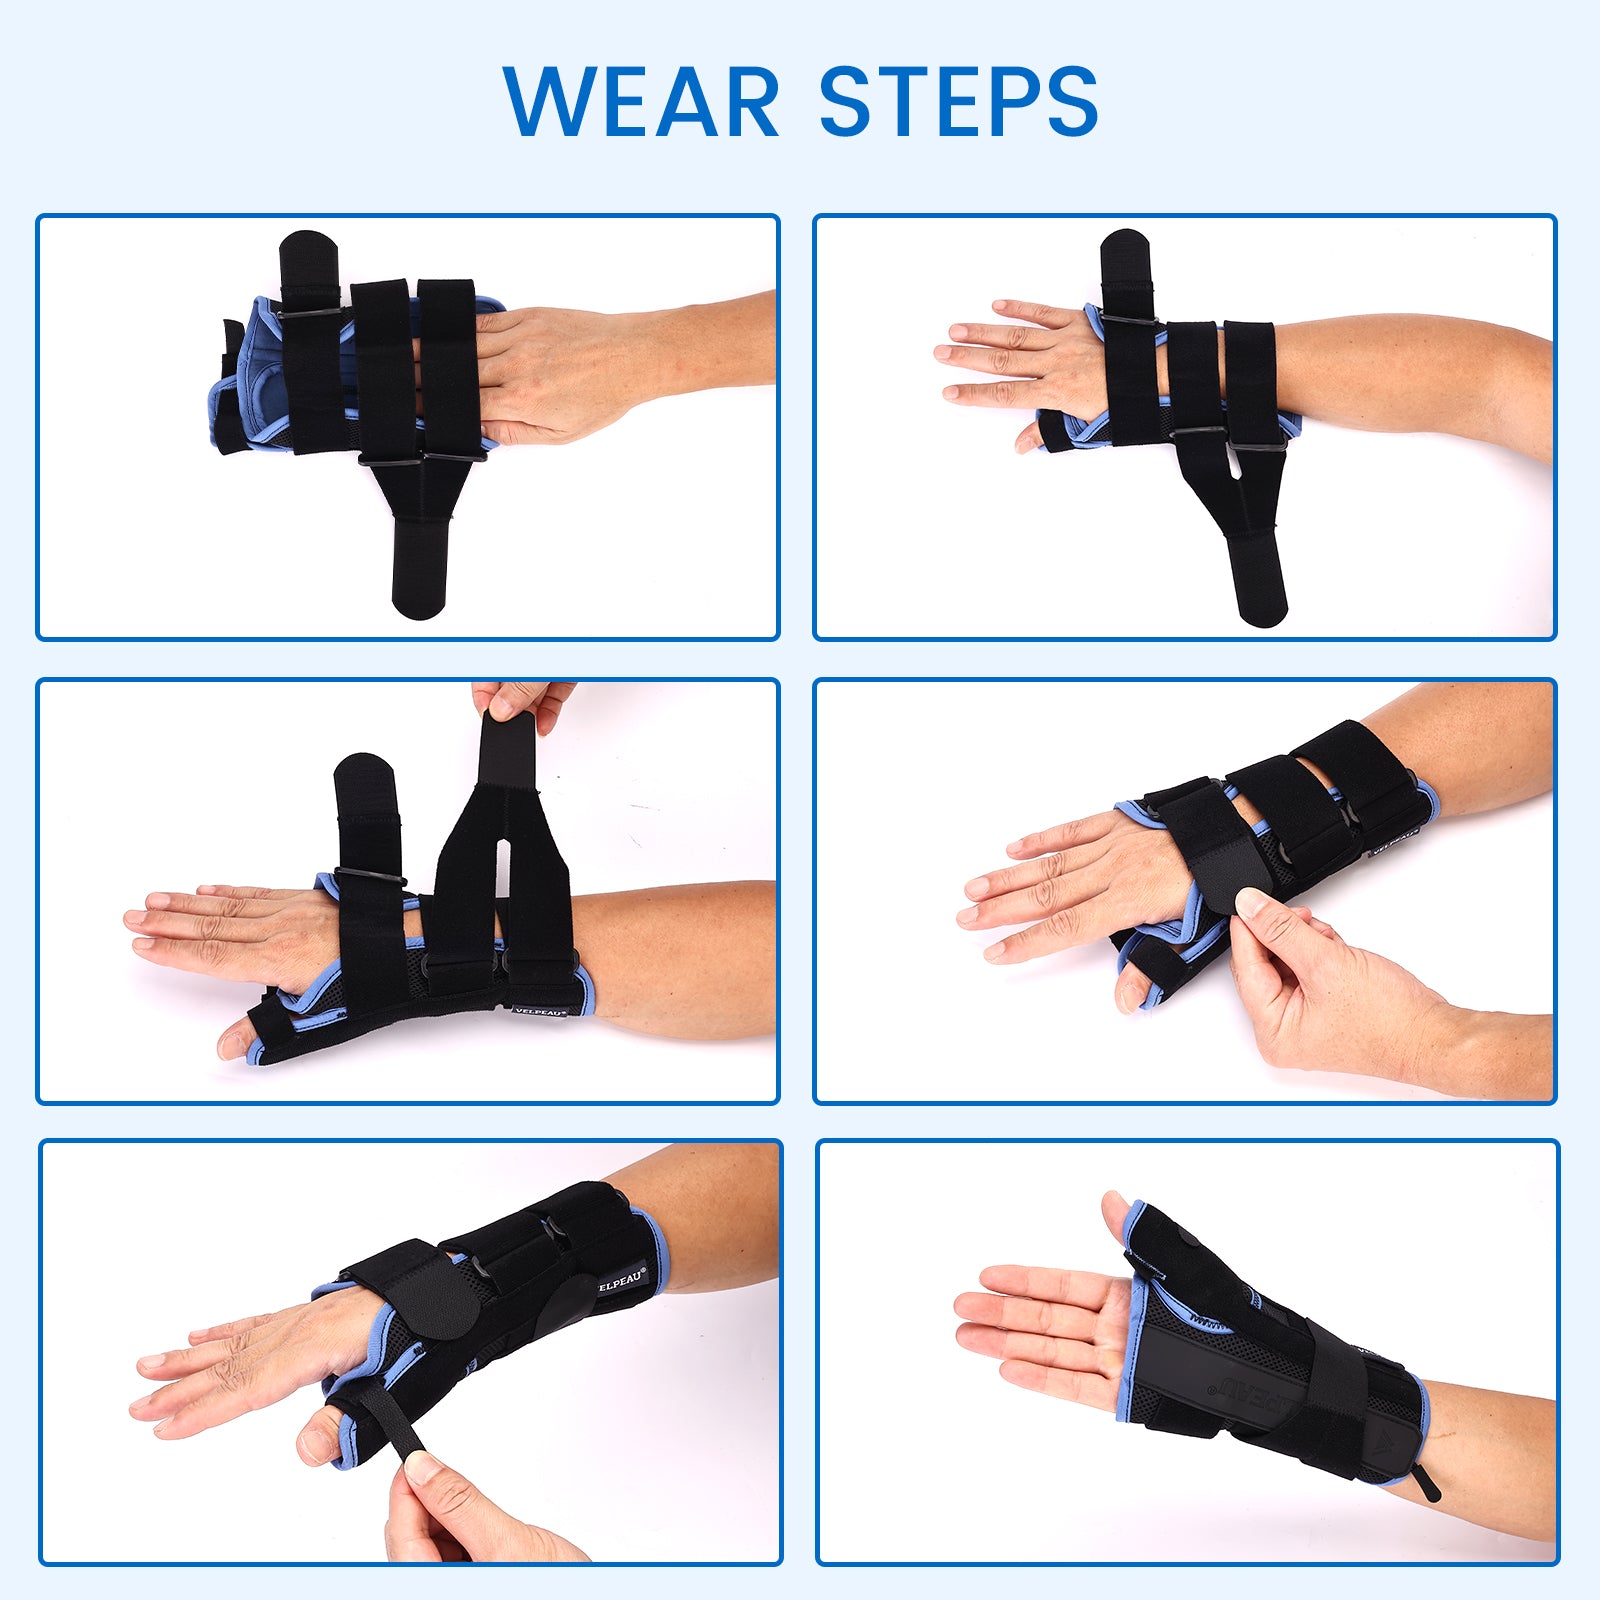  Velpeau Wrist Brace with Thumb Spica Splint for De Quervain's  Tenosynovitis, Carpal Tunnel Pain, Stabilizer for Tendonitis, Arthritis,  Sprains & Fracture Forearm Support Cast (Regular, Right Hand-M) : Health &  Household